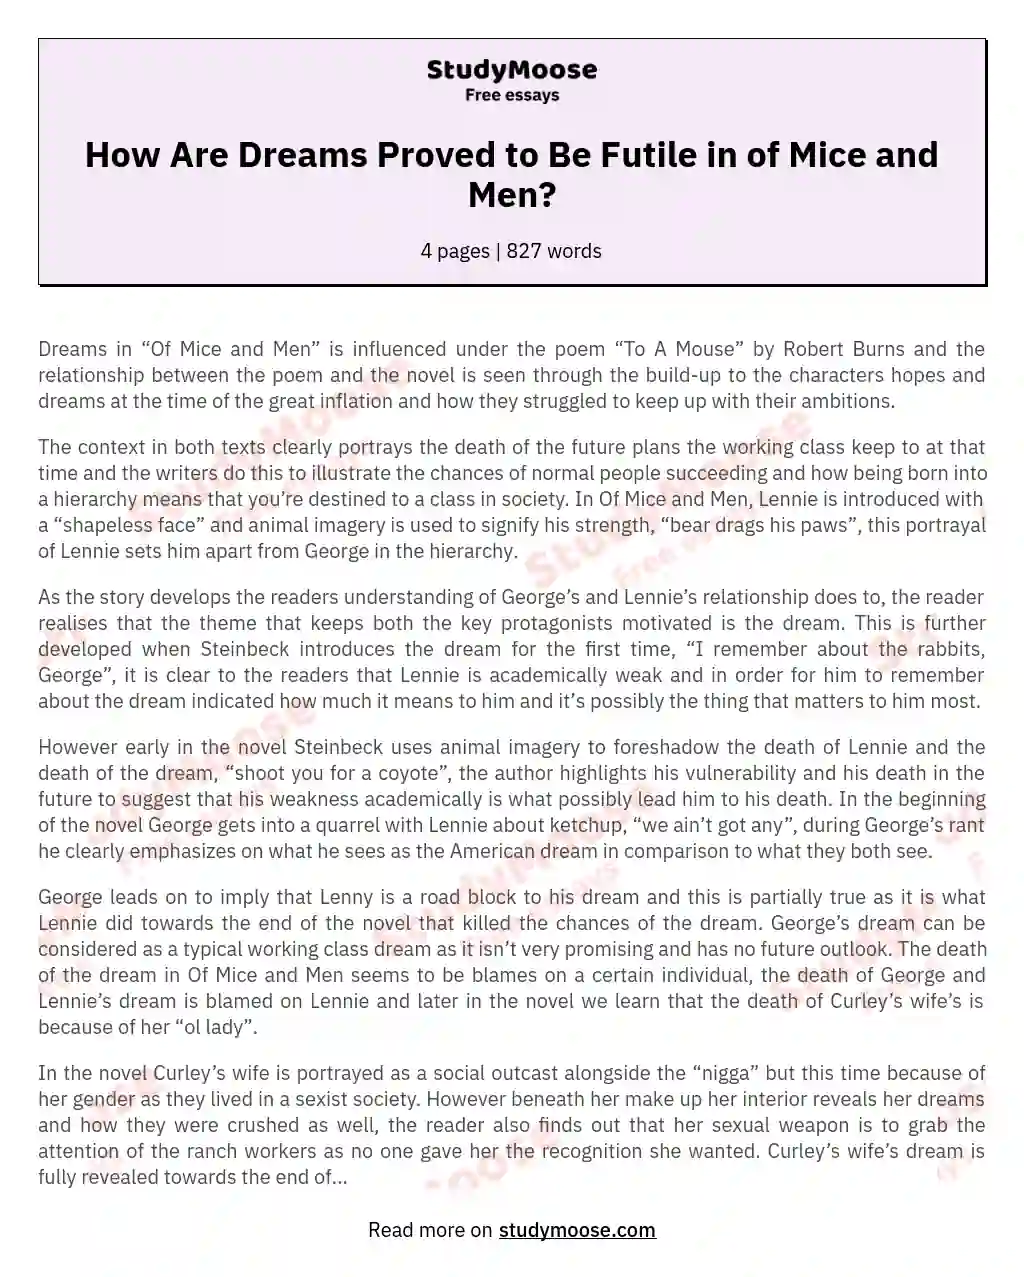 How Are Dreams Proved to Be Futile in of Mice and Men? essay